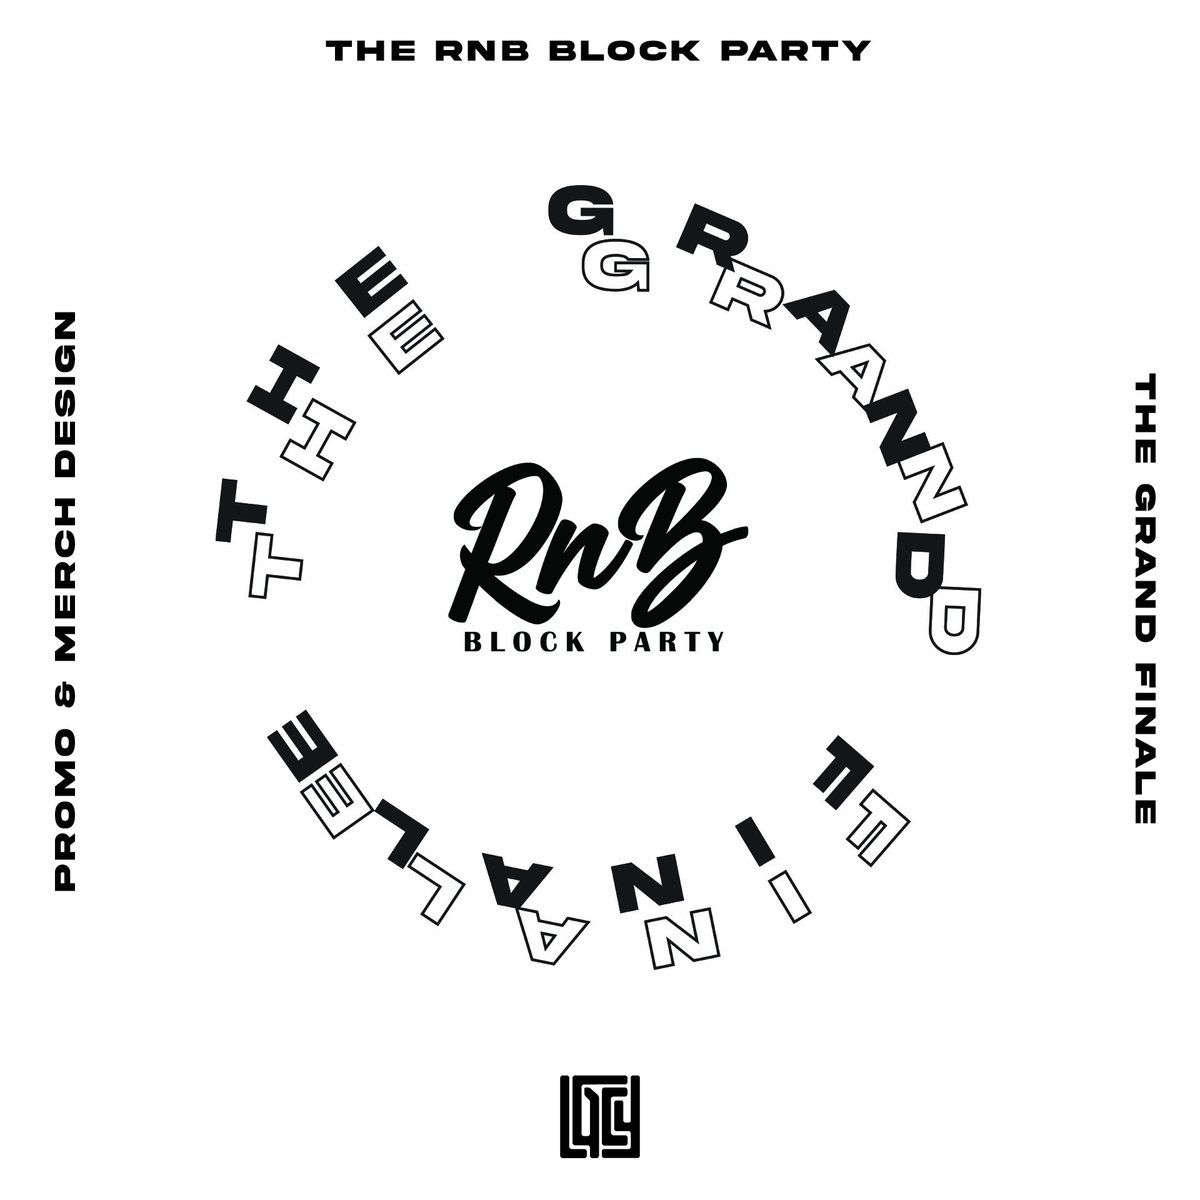 LGCY  Concepts | The RnB Block Party Event Promo and Merch Design
.
.
.
#branding #merchdesign #eventpromo #tshirtdesign #thernbblockparty #lgcyconcepts